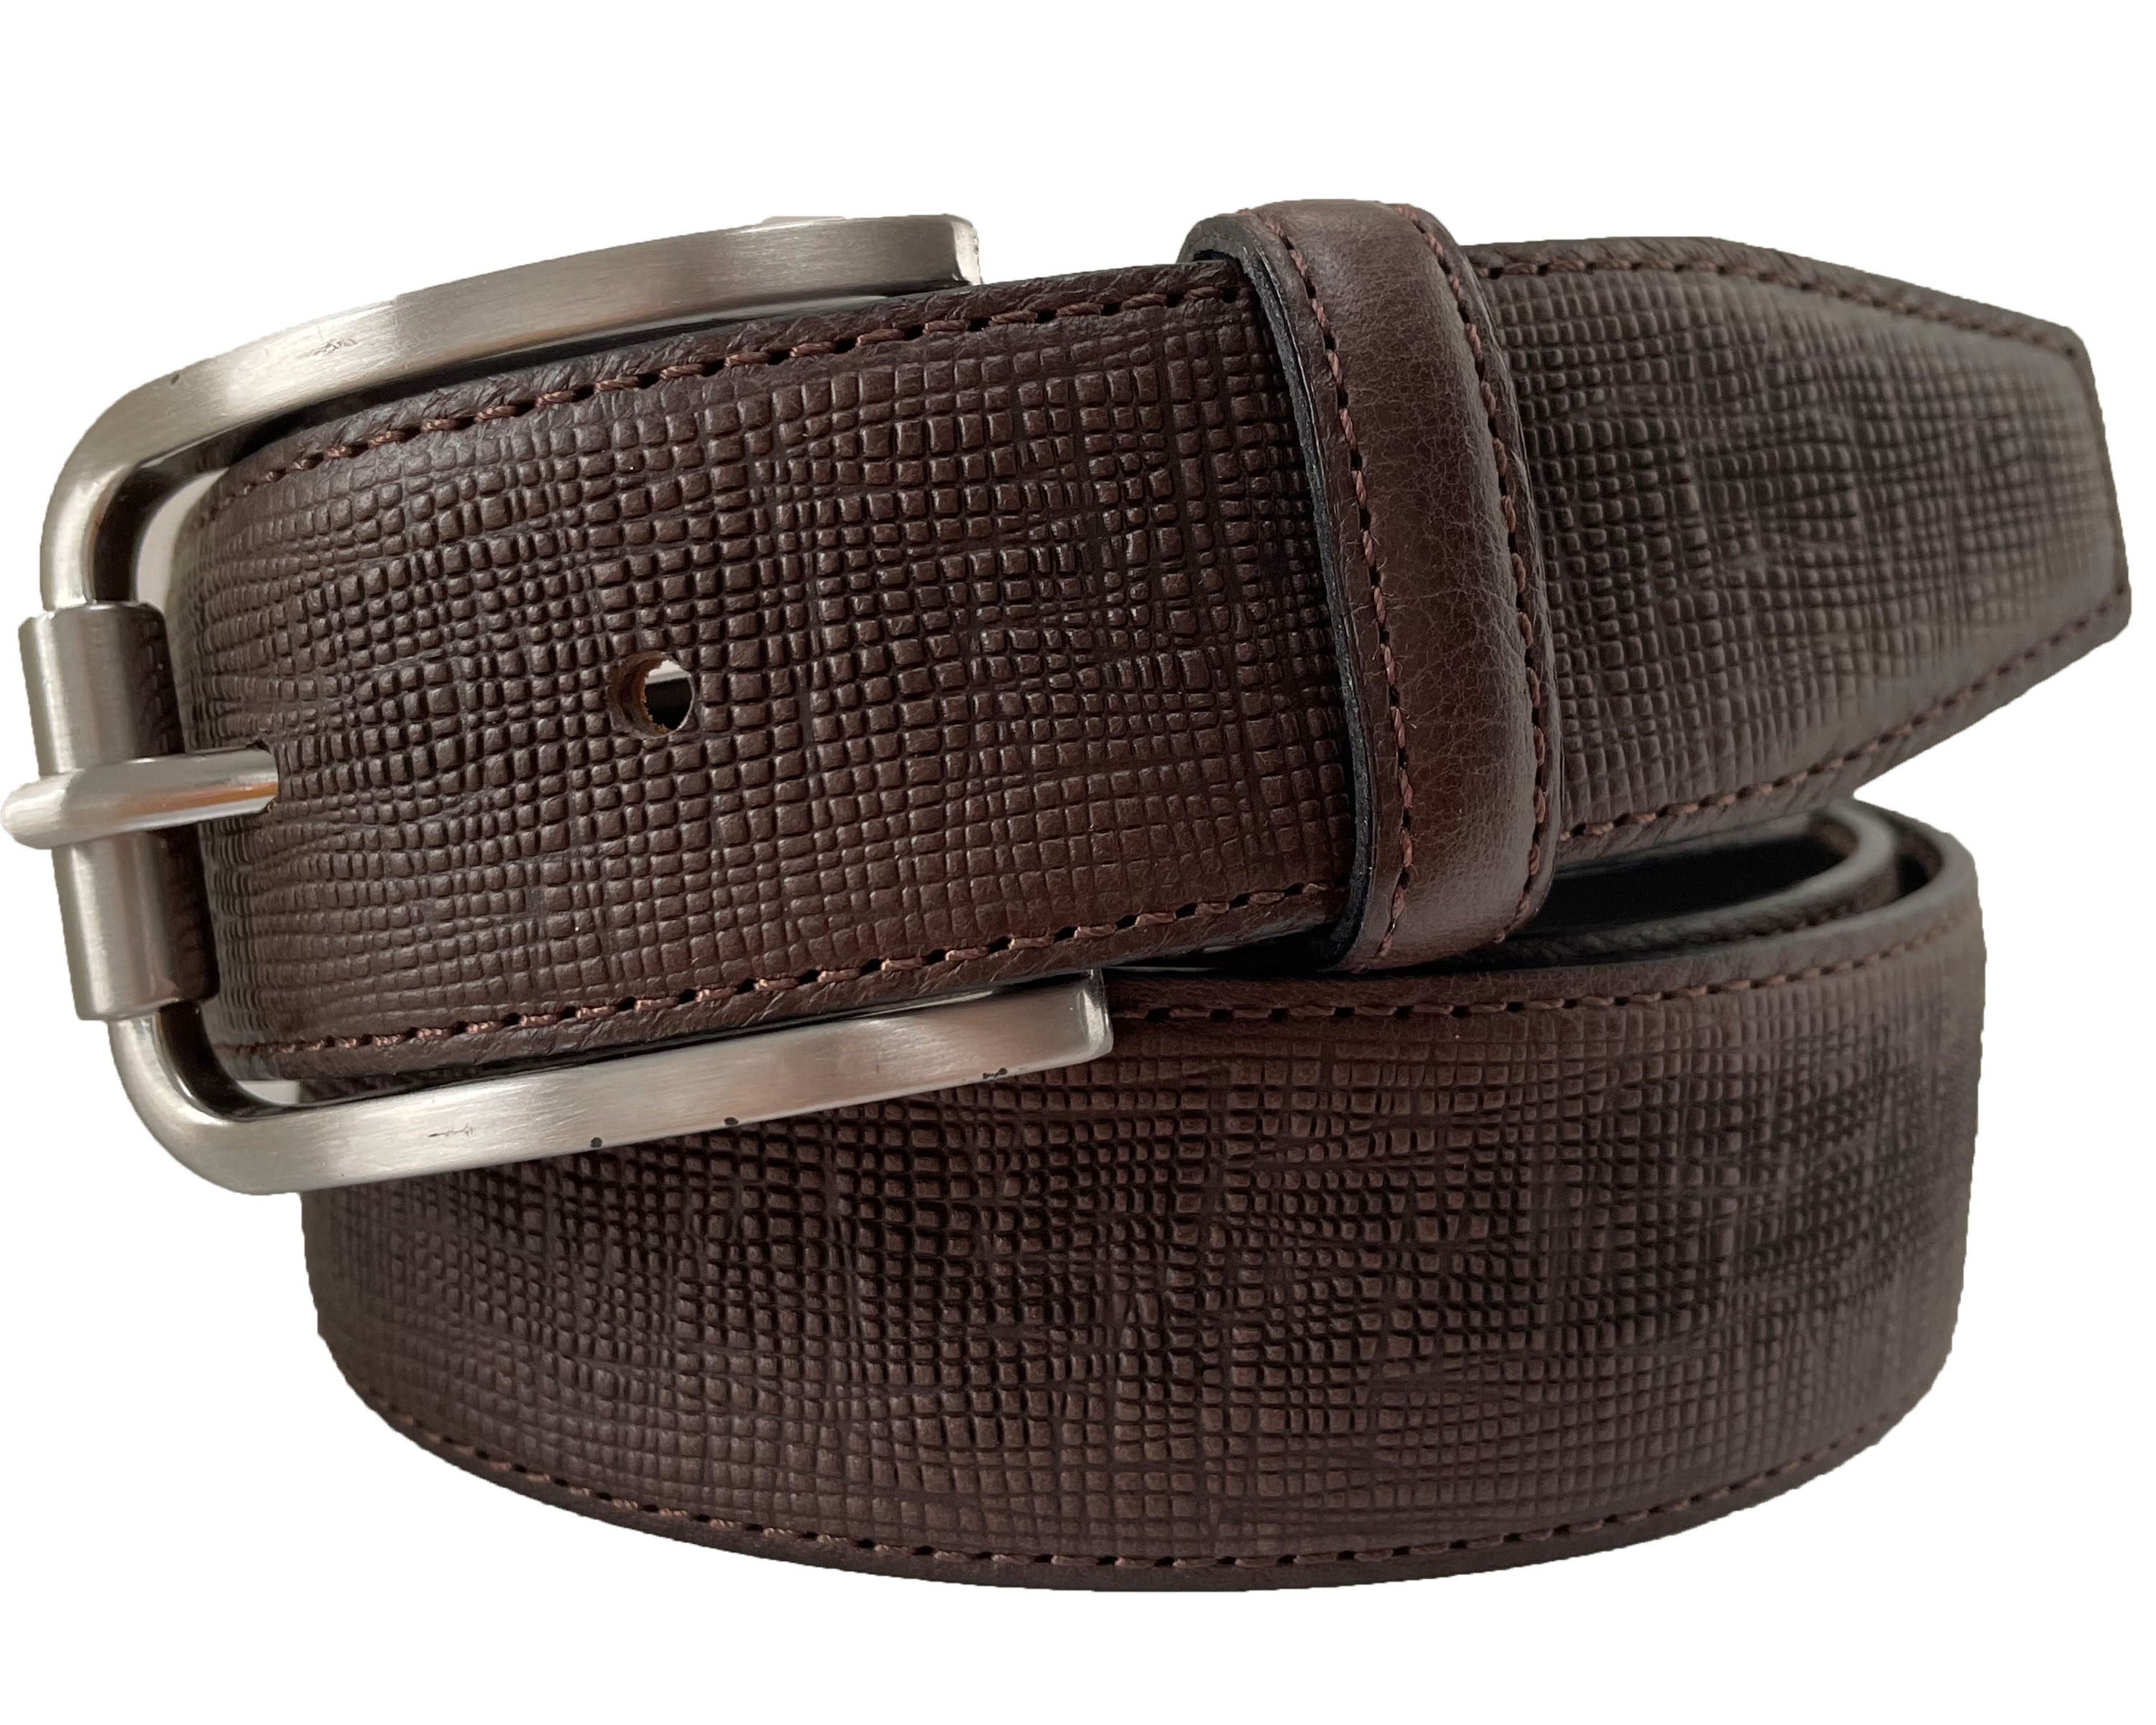 BROWN IMPRINTED CROSS GRAIN LEATHER 35MM LEATHER BELT